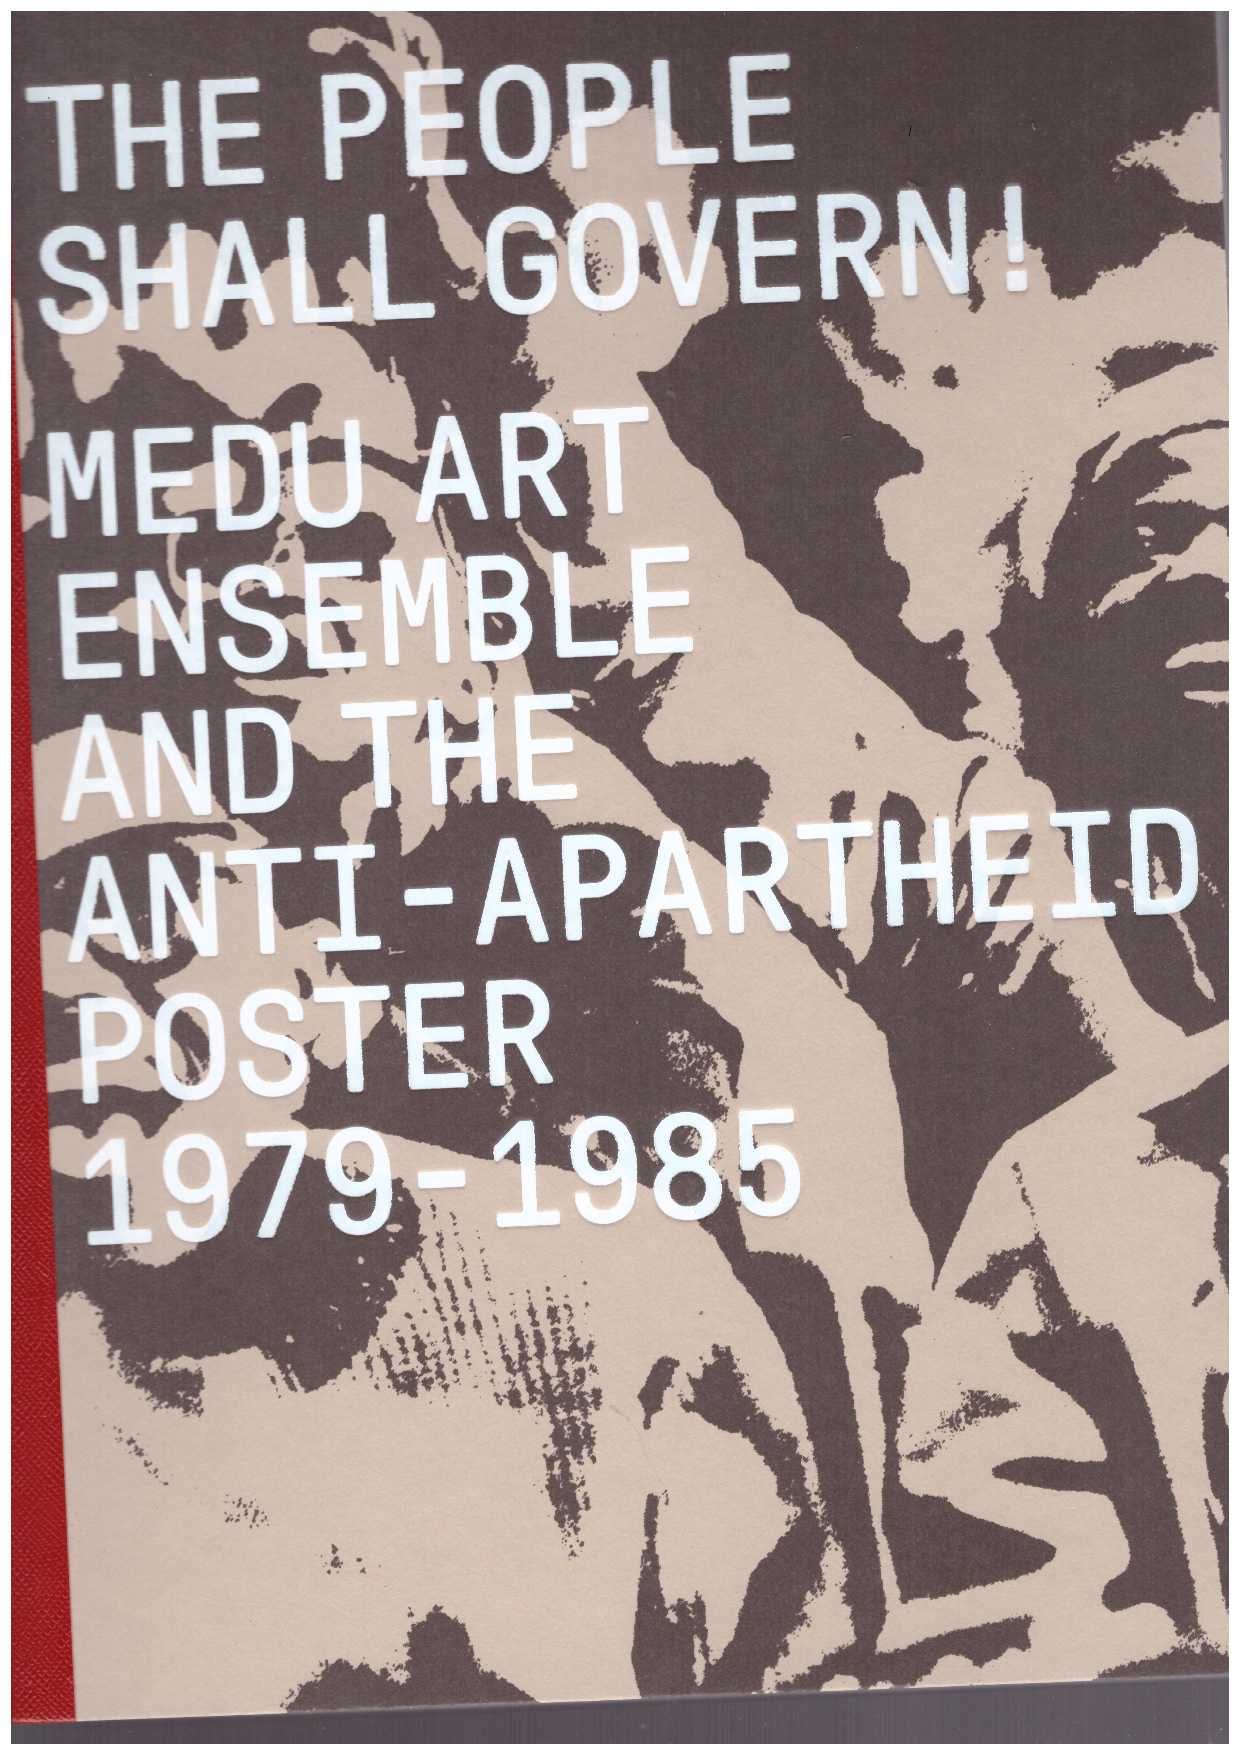 BYRD, Antawan; MINGS, Felicia (eds.) - The People Shall Govern! Medu Art Ensemble and the Anti-Apartheid Poster, 1979-1985